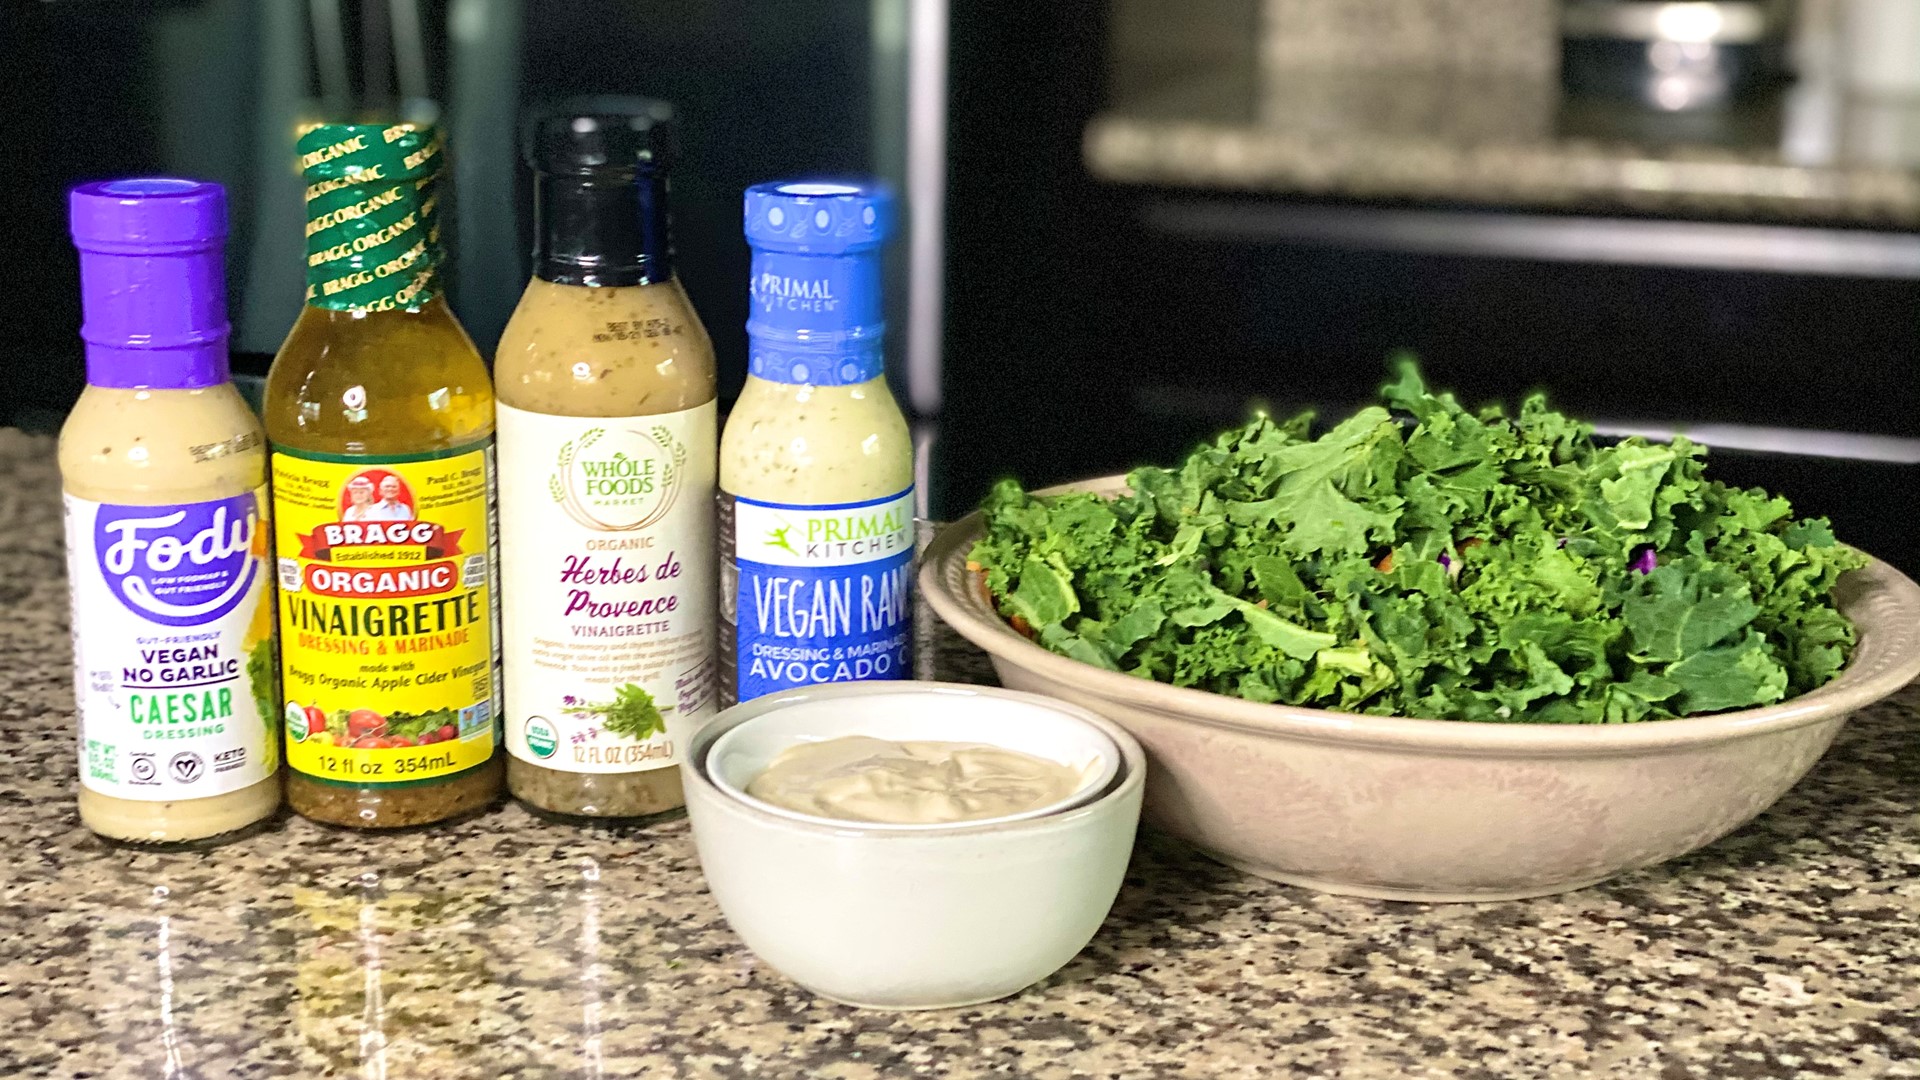 Sometimes people want to eat salad to be healthy, but the dressing can make it unhealthy. The best way to make sure you have a good dressing: make it yourself!